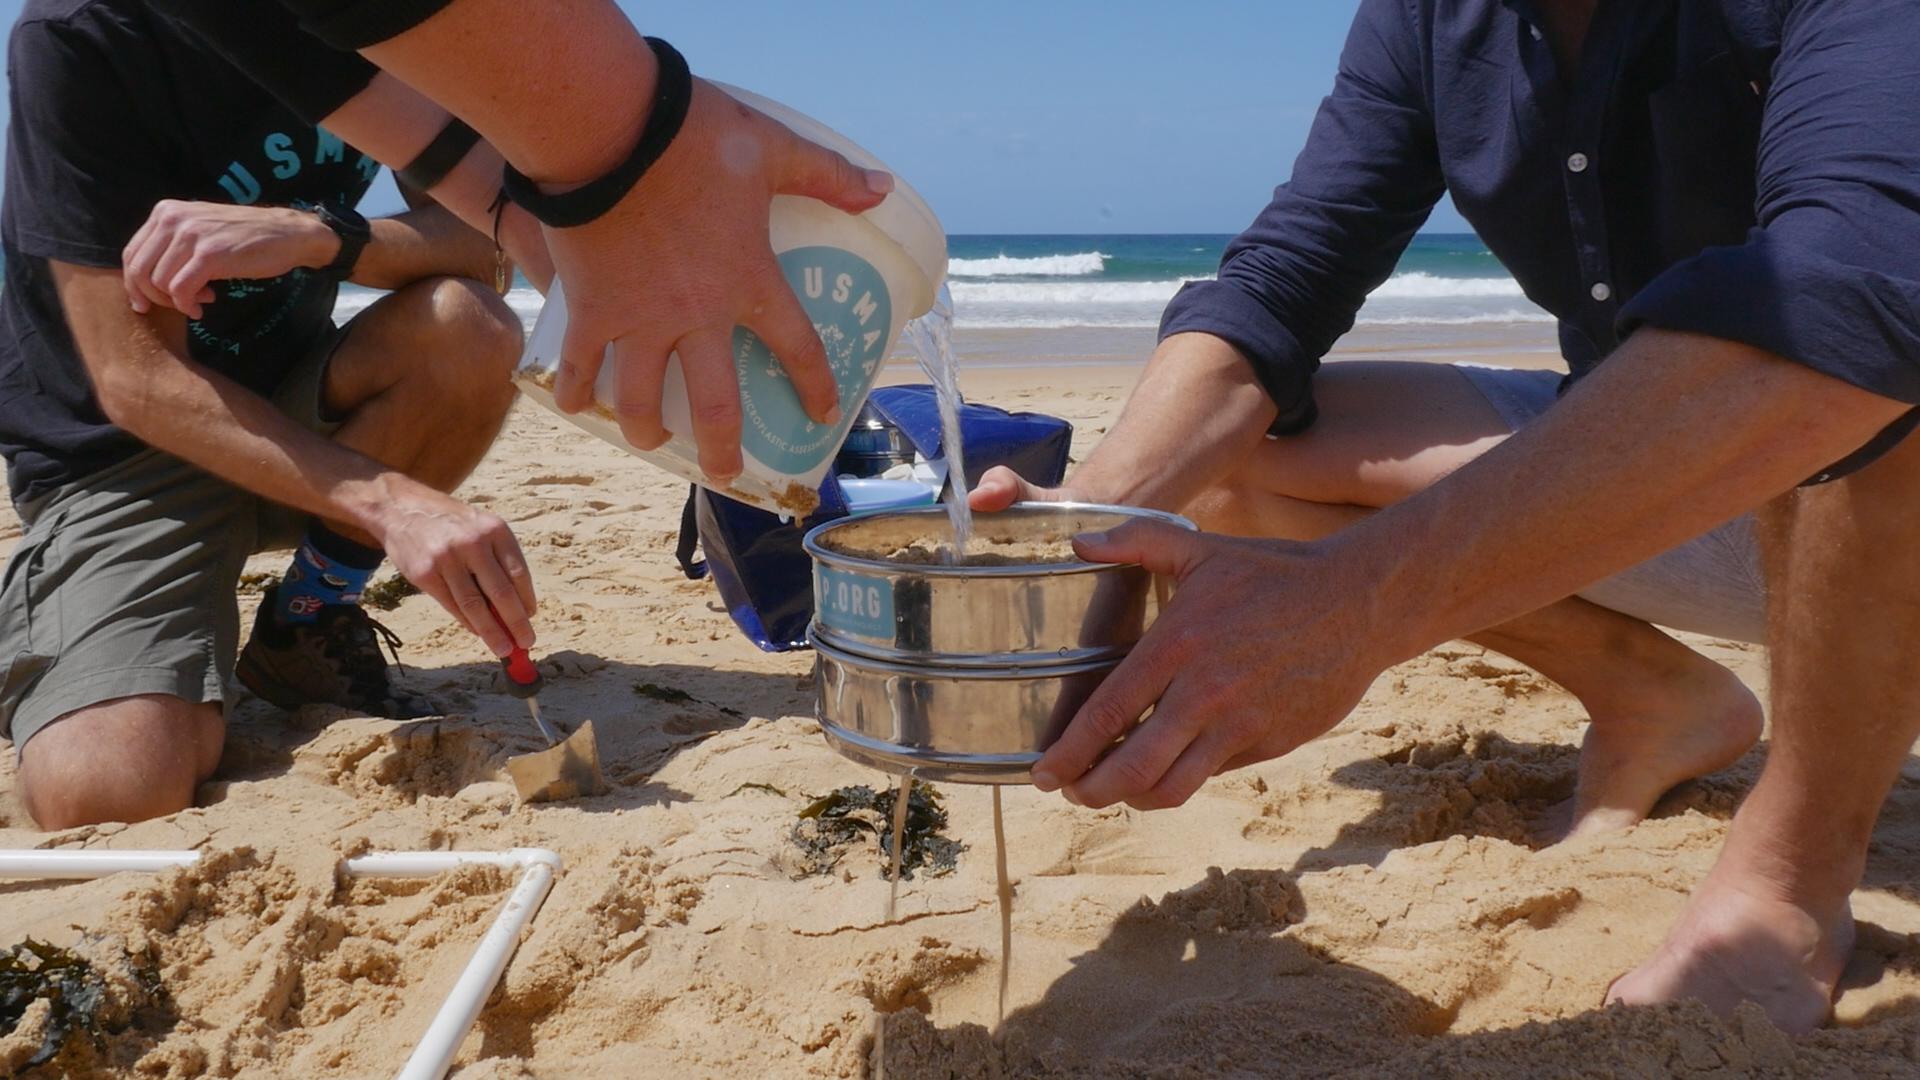 Sieving for microplastics is part of the AUSMAP data being collected all over Australia.